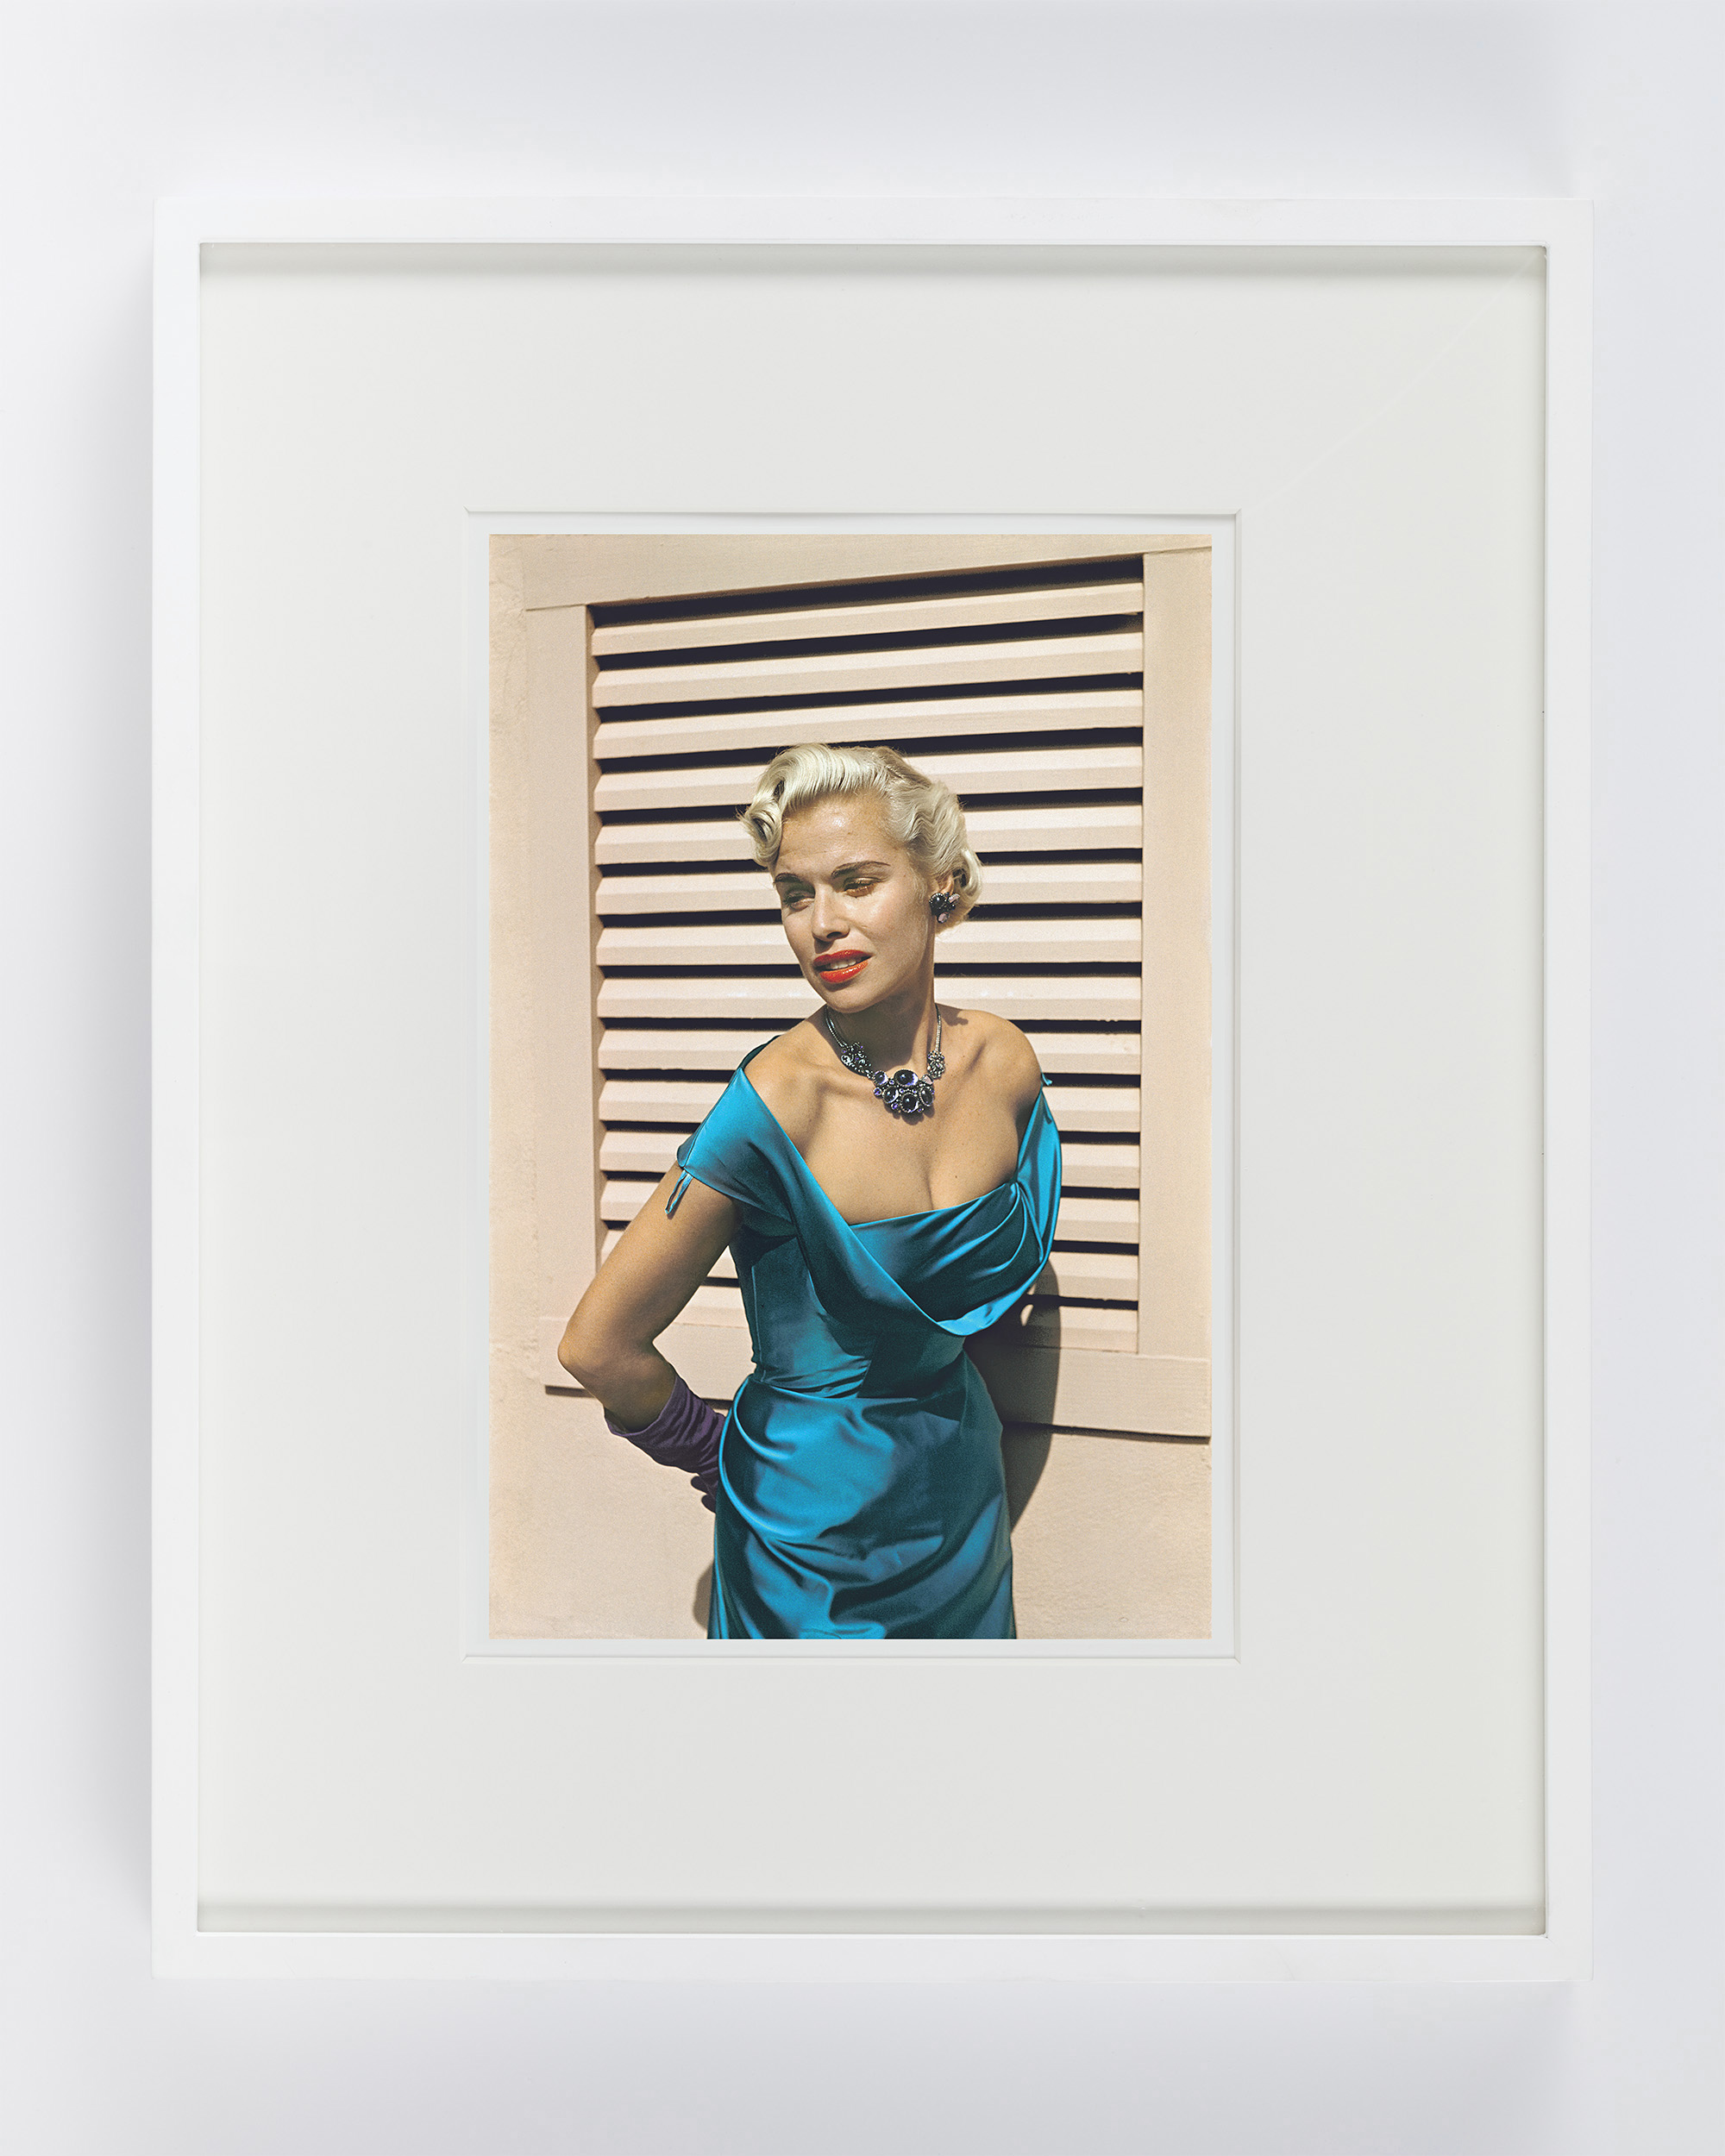 Paul Outerbridge
Woman with Blue Dress and Pendant Necklace, Laguna Beach, California, c.1952
CarbroArt™ digital pigment print process, by Steidl in Göttingen, 2018
Arches 88, 300 gsm 100% cotton acid-free paper
16“ x 20“ framed Edition of 25